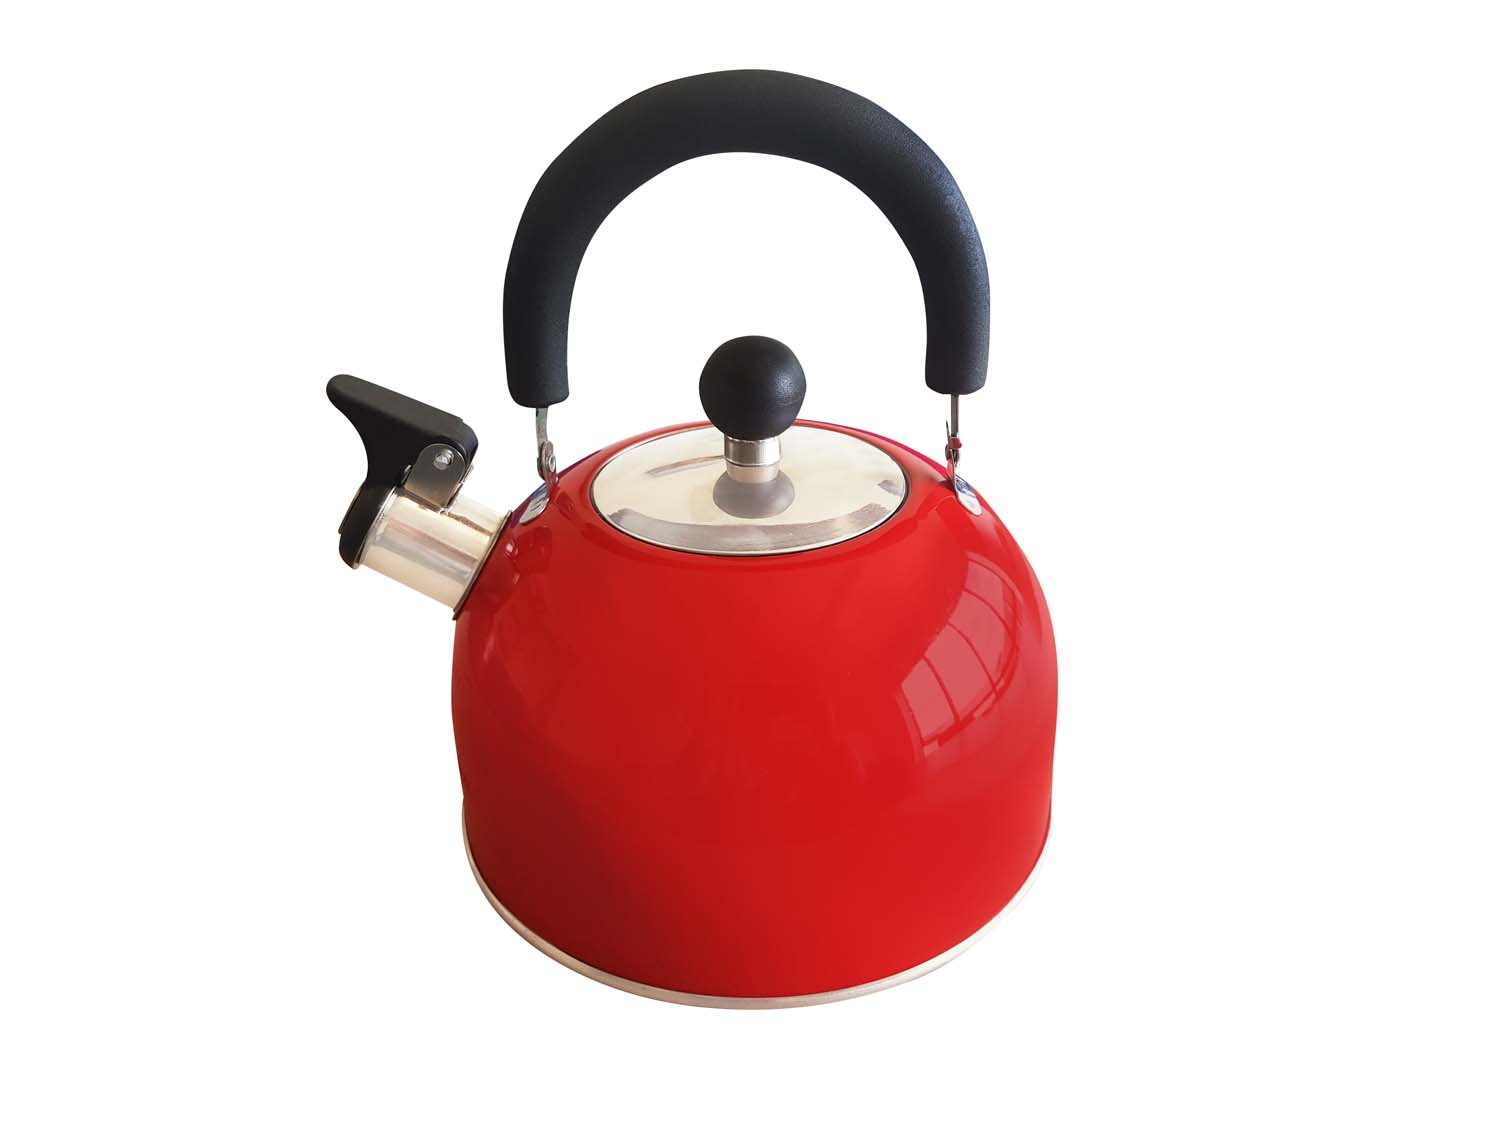 Southern Alps Whistling Kettle Red 1.5L